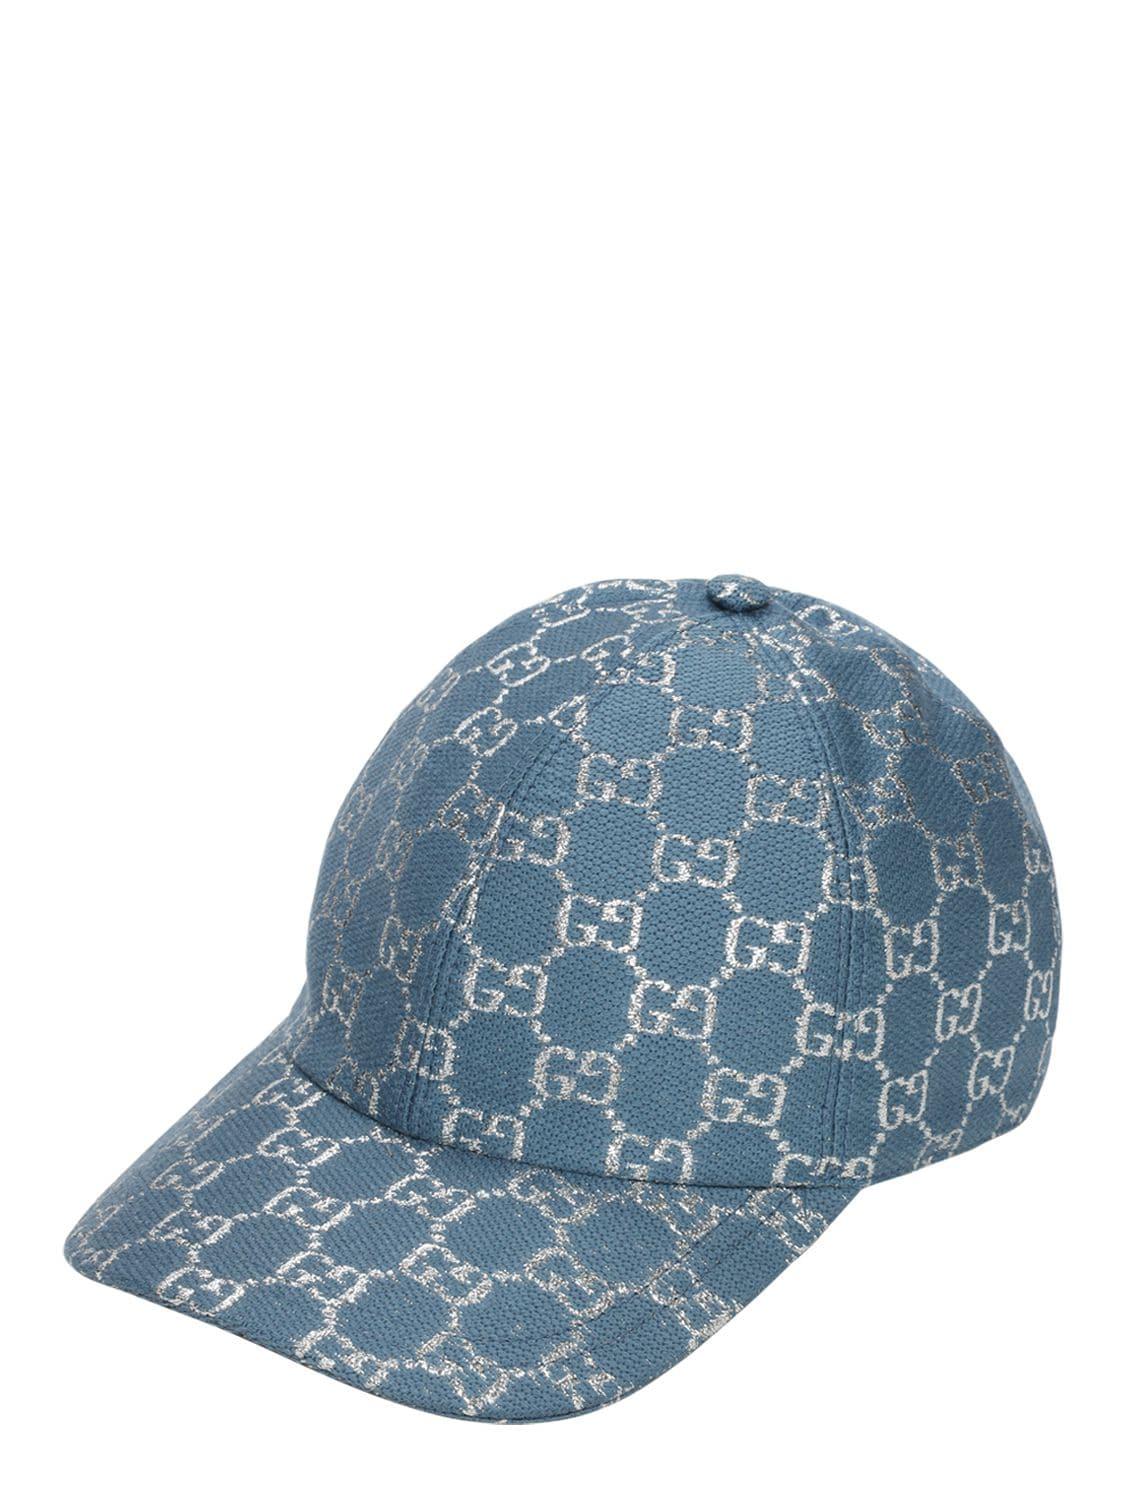 Gucci GG Lamé Baseball Hat in Turquoise Blue (Blue) | Lyst